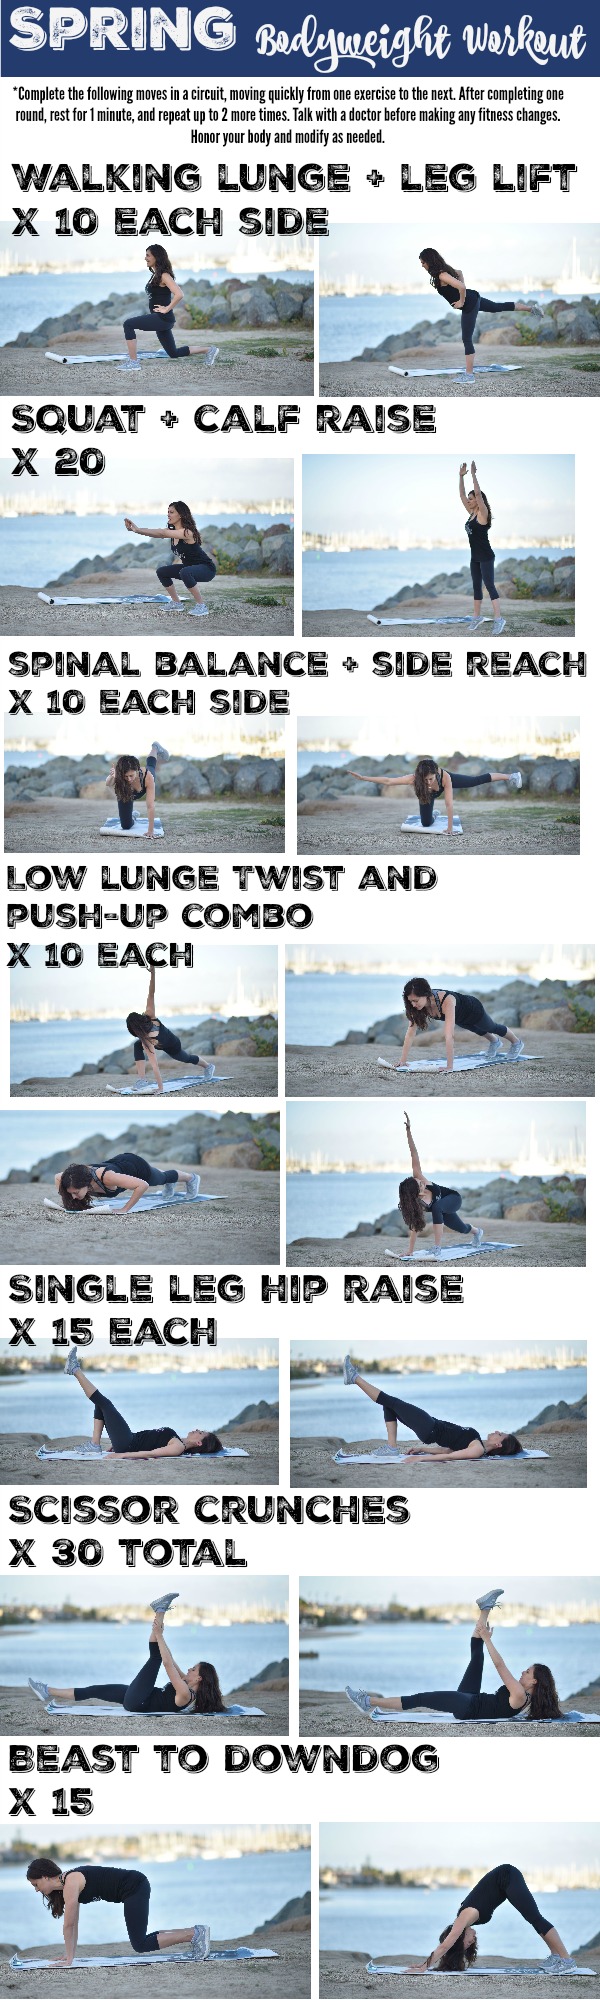 Spring bodyweight workout you can do anywhere! Take this workout outside or try it in your hotel room next time you're traveling! fitnessista.com